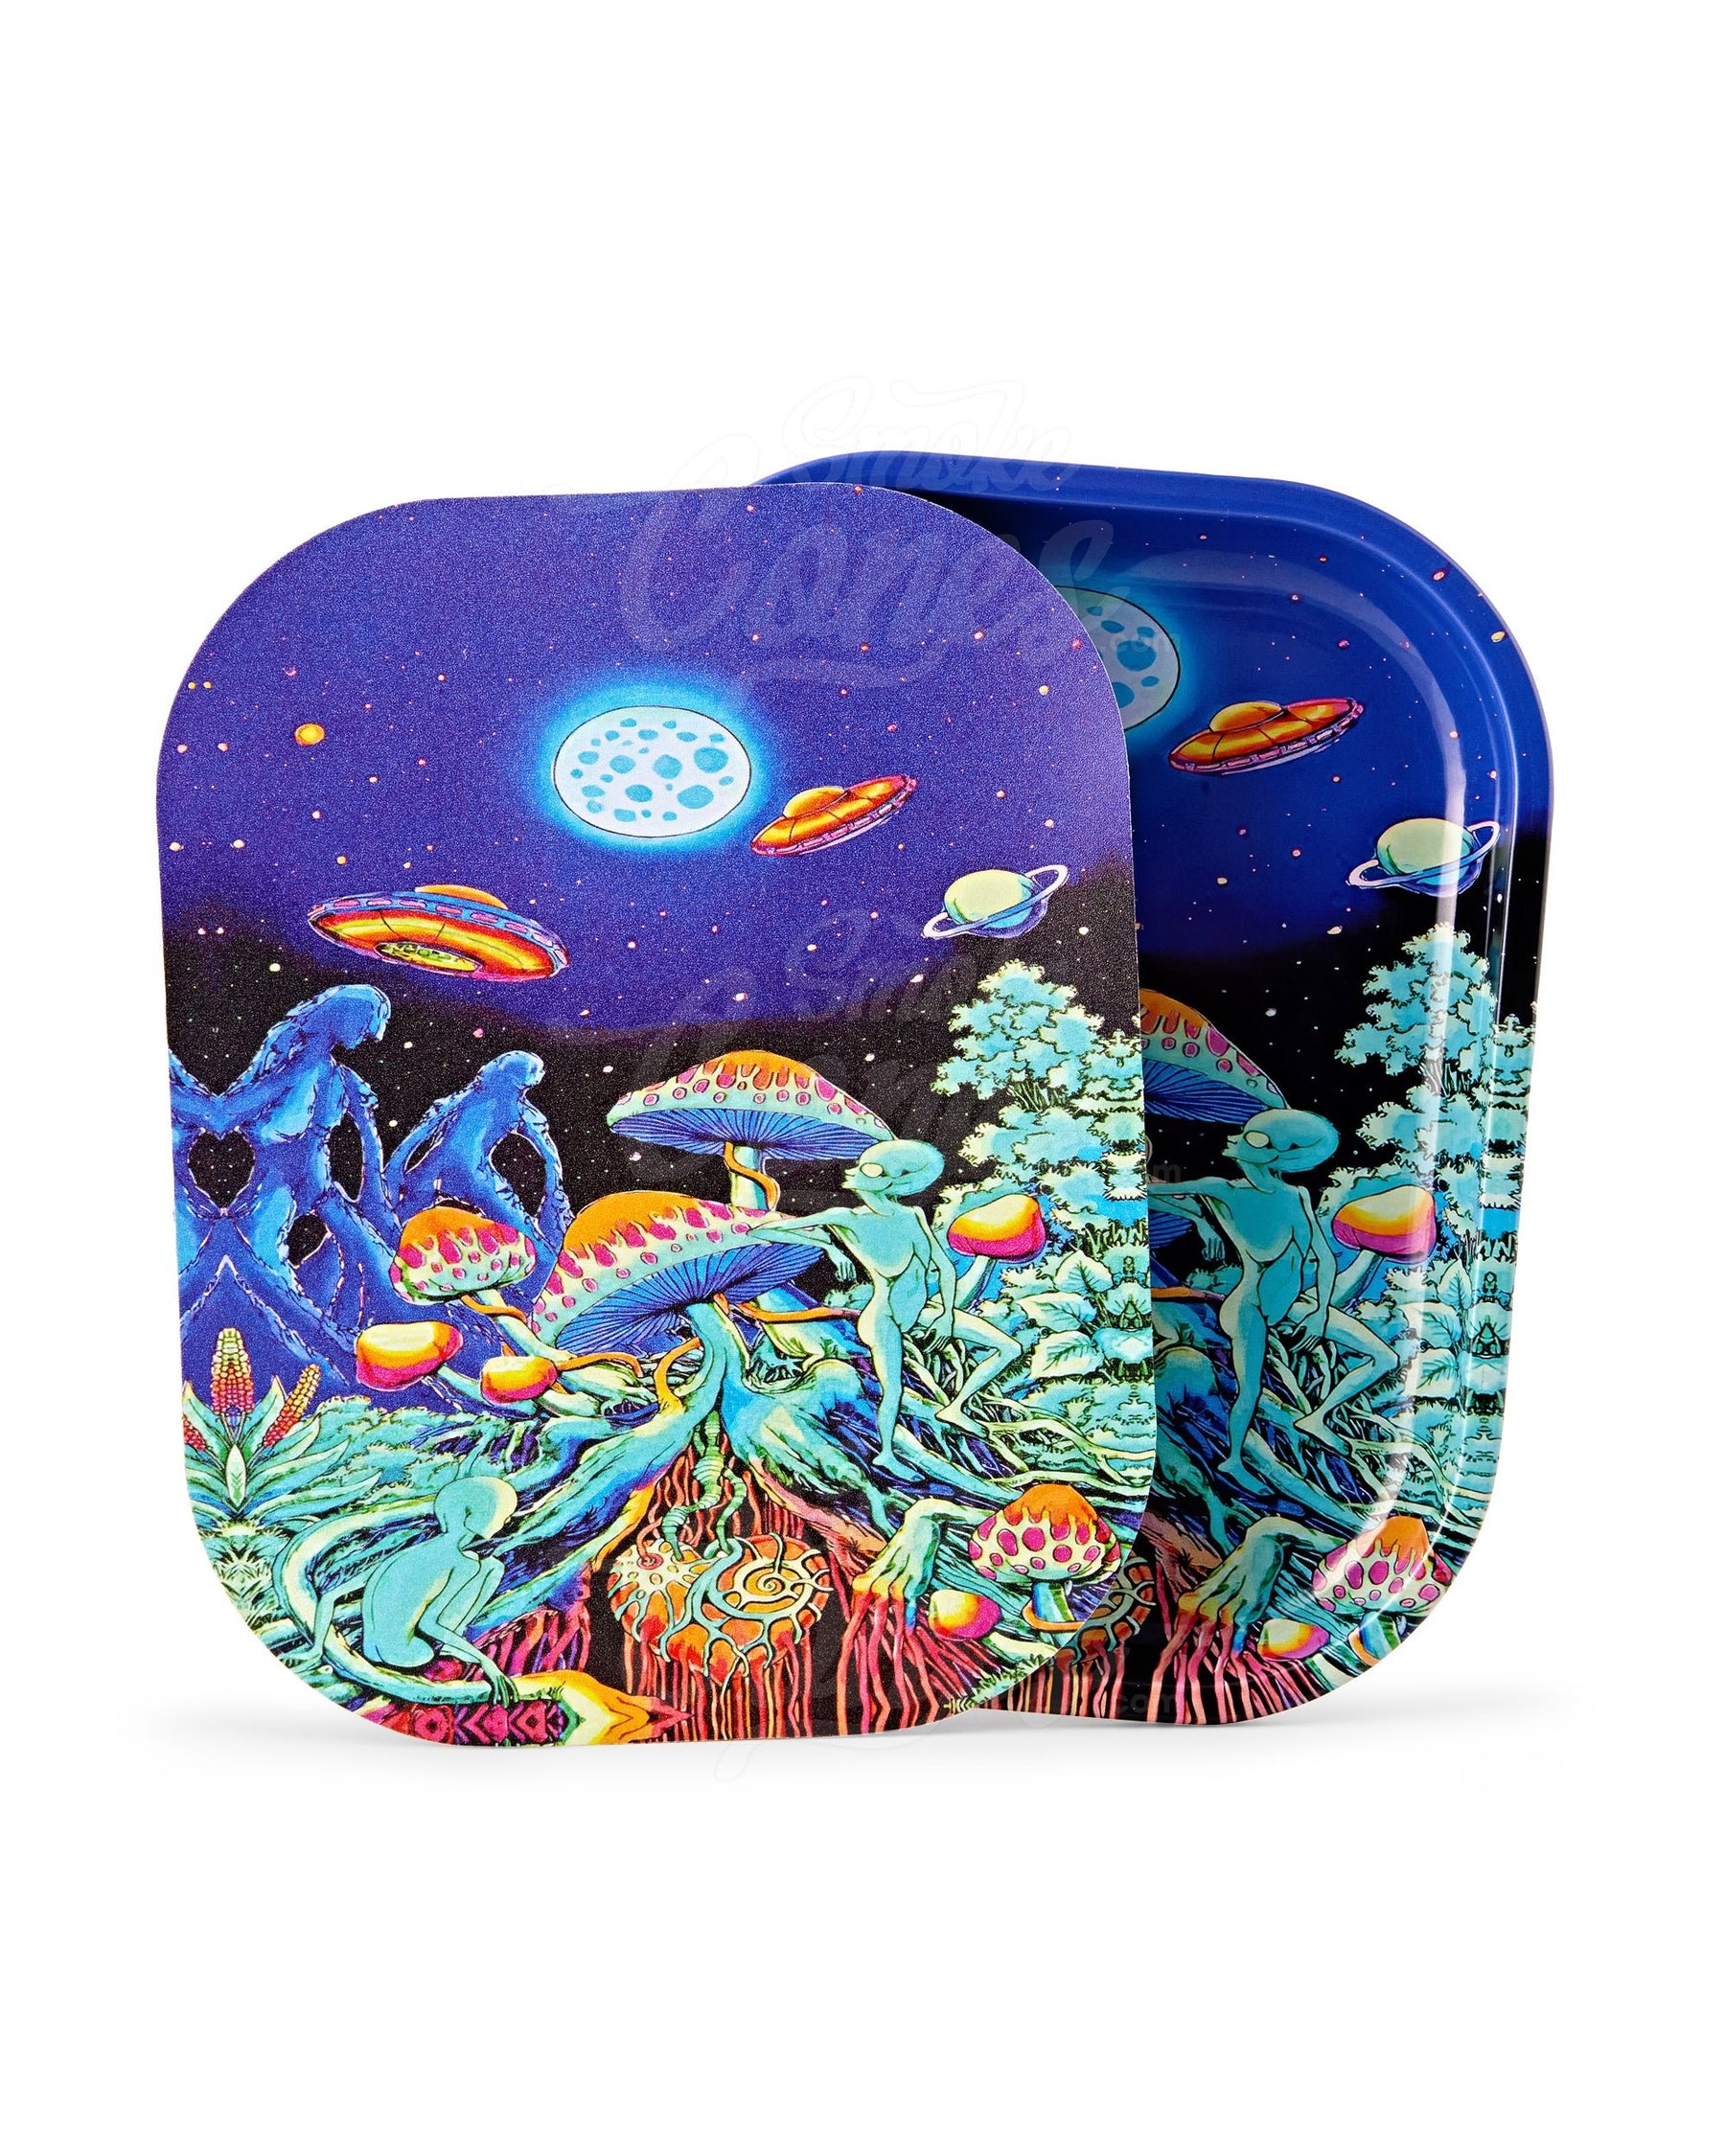 Space Mushroom Mini Rolling Tray w/ Magnetic Cover - 1